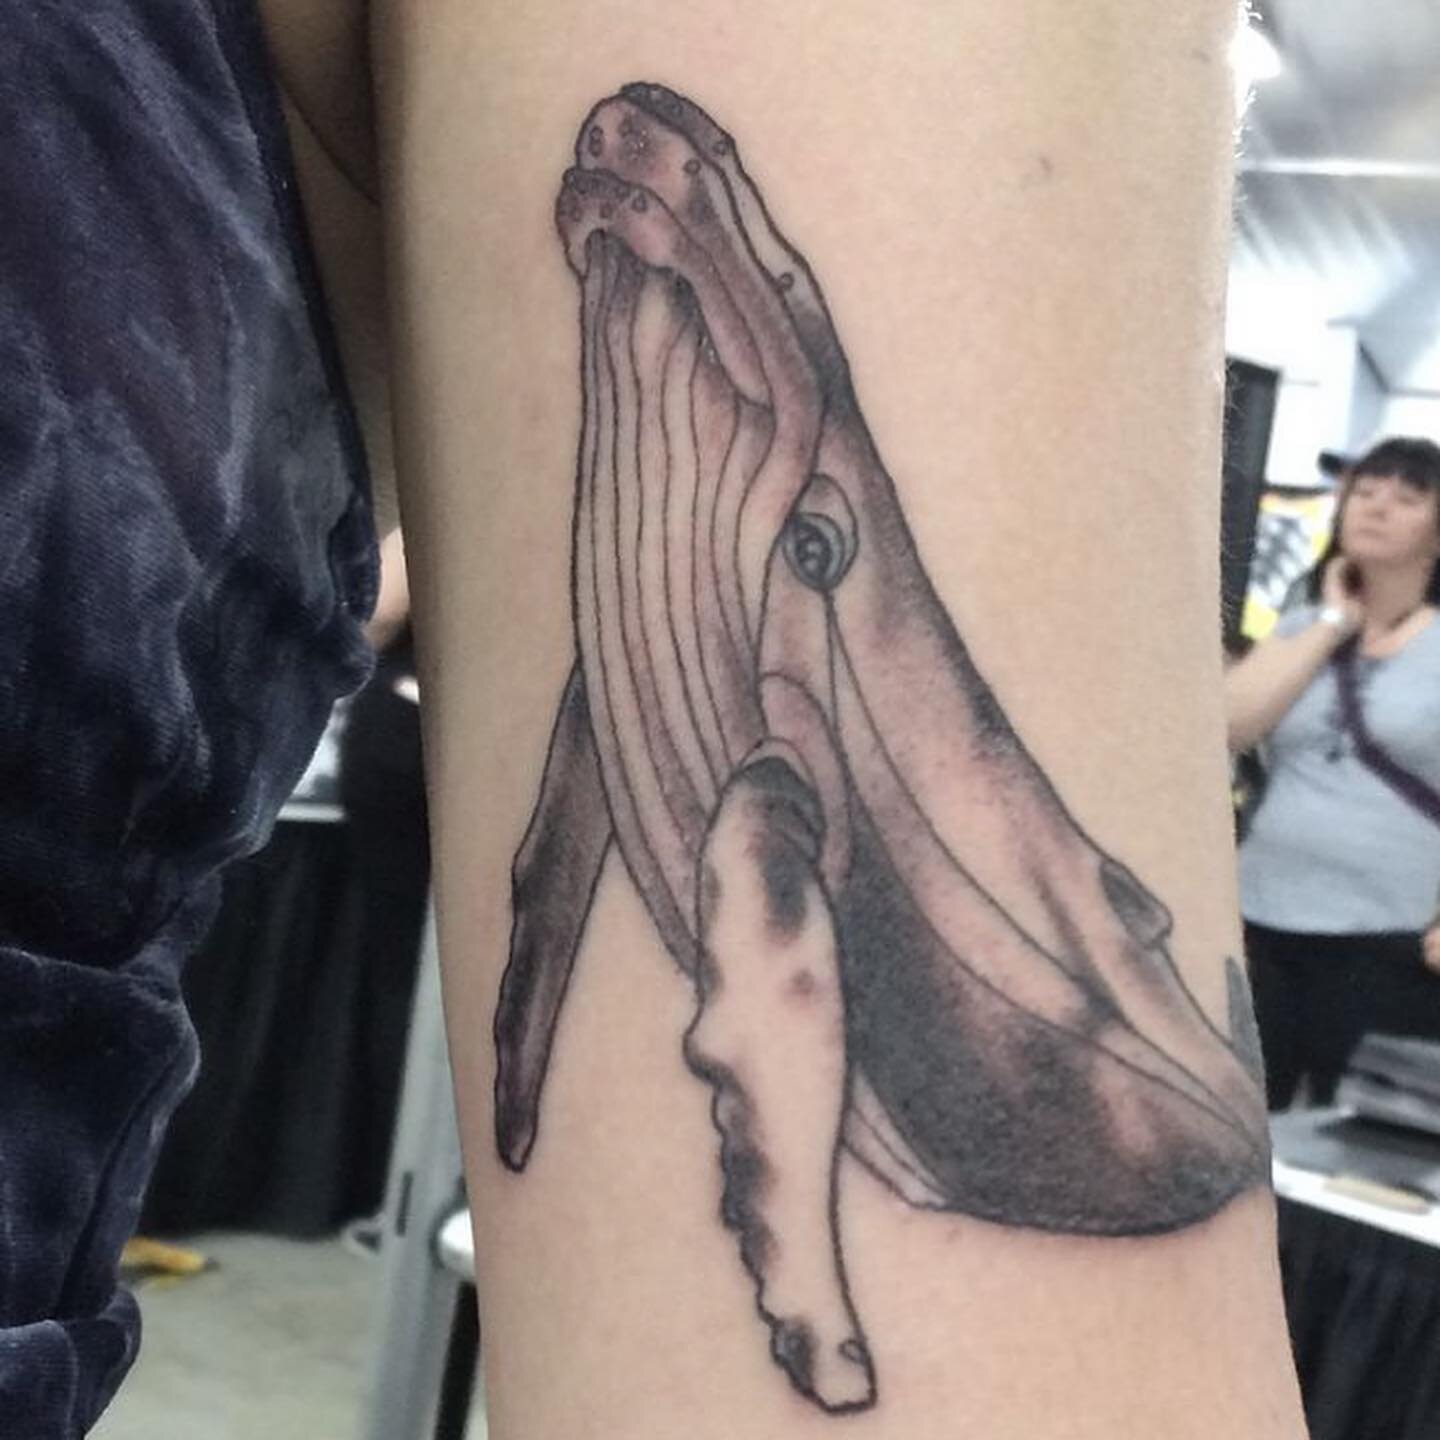 Throw back to the @st.johnstattooconvention from a few years ago and when my posts actually got seen 😅🐋 tattoosbyloorin@gmail.com for appointments here or there 
.
.
.
#whaletattoo #humpbackwhaletattoo #newfoundlandtattoo #blackandgreytattoo #armta